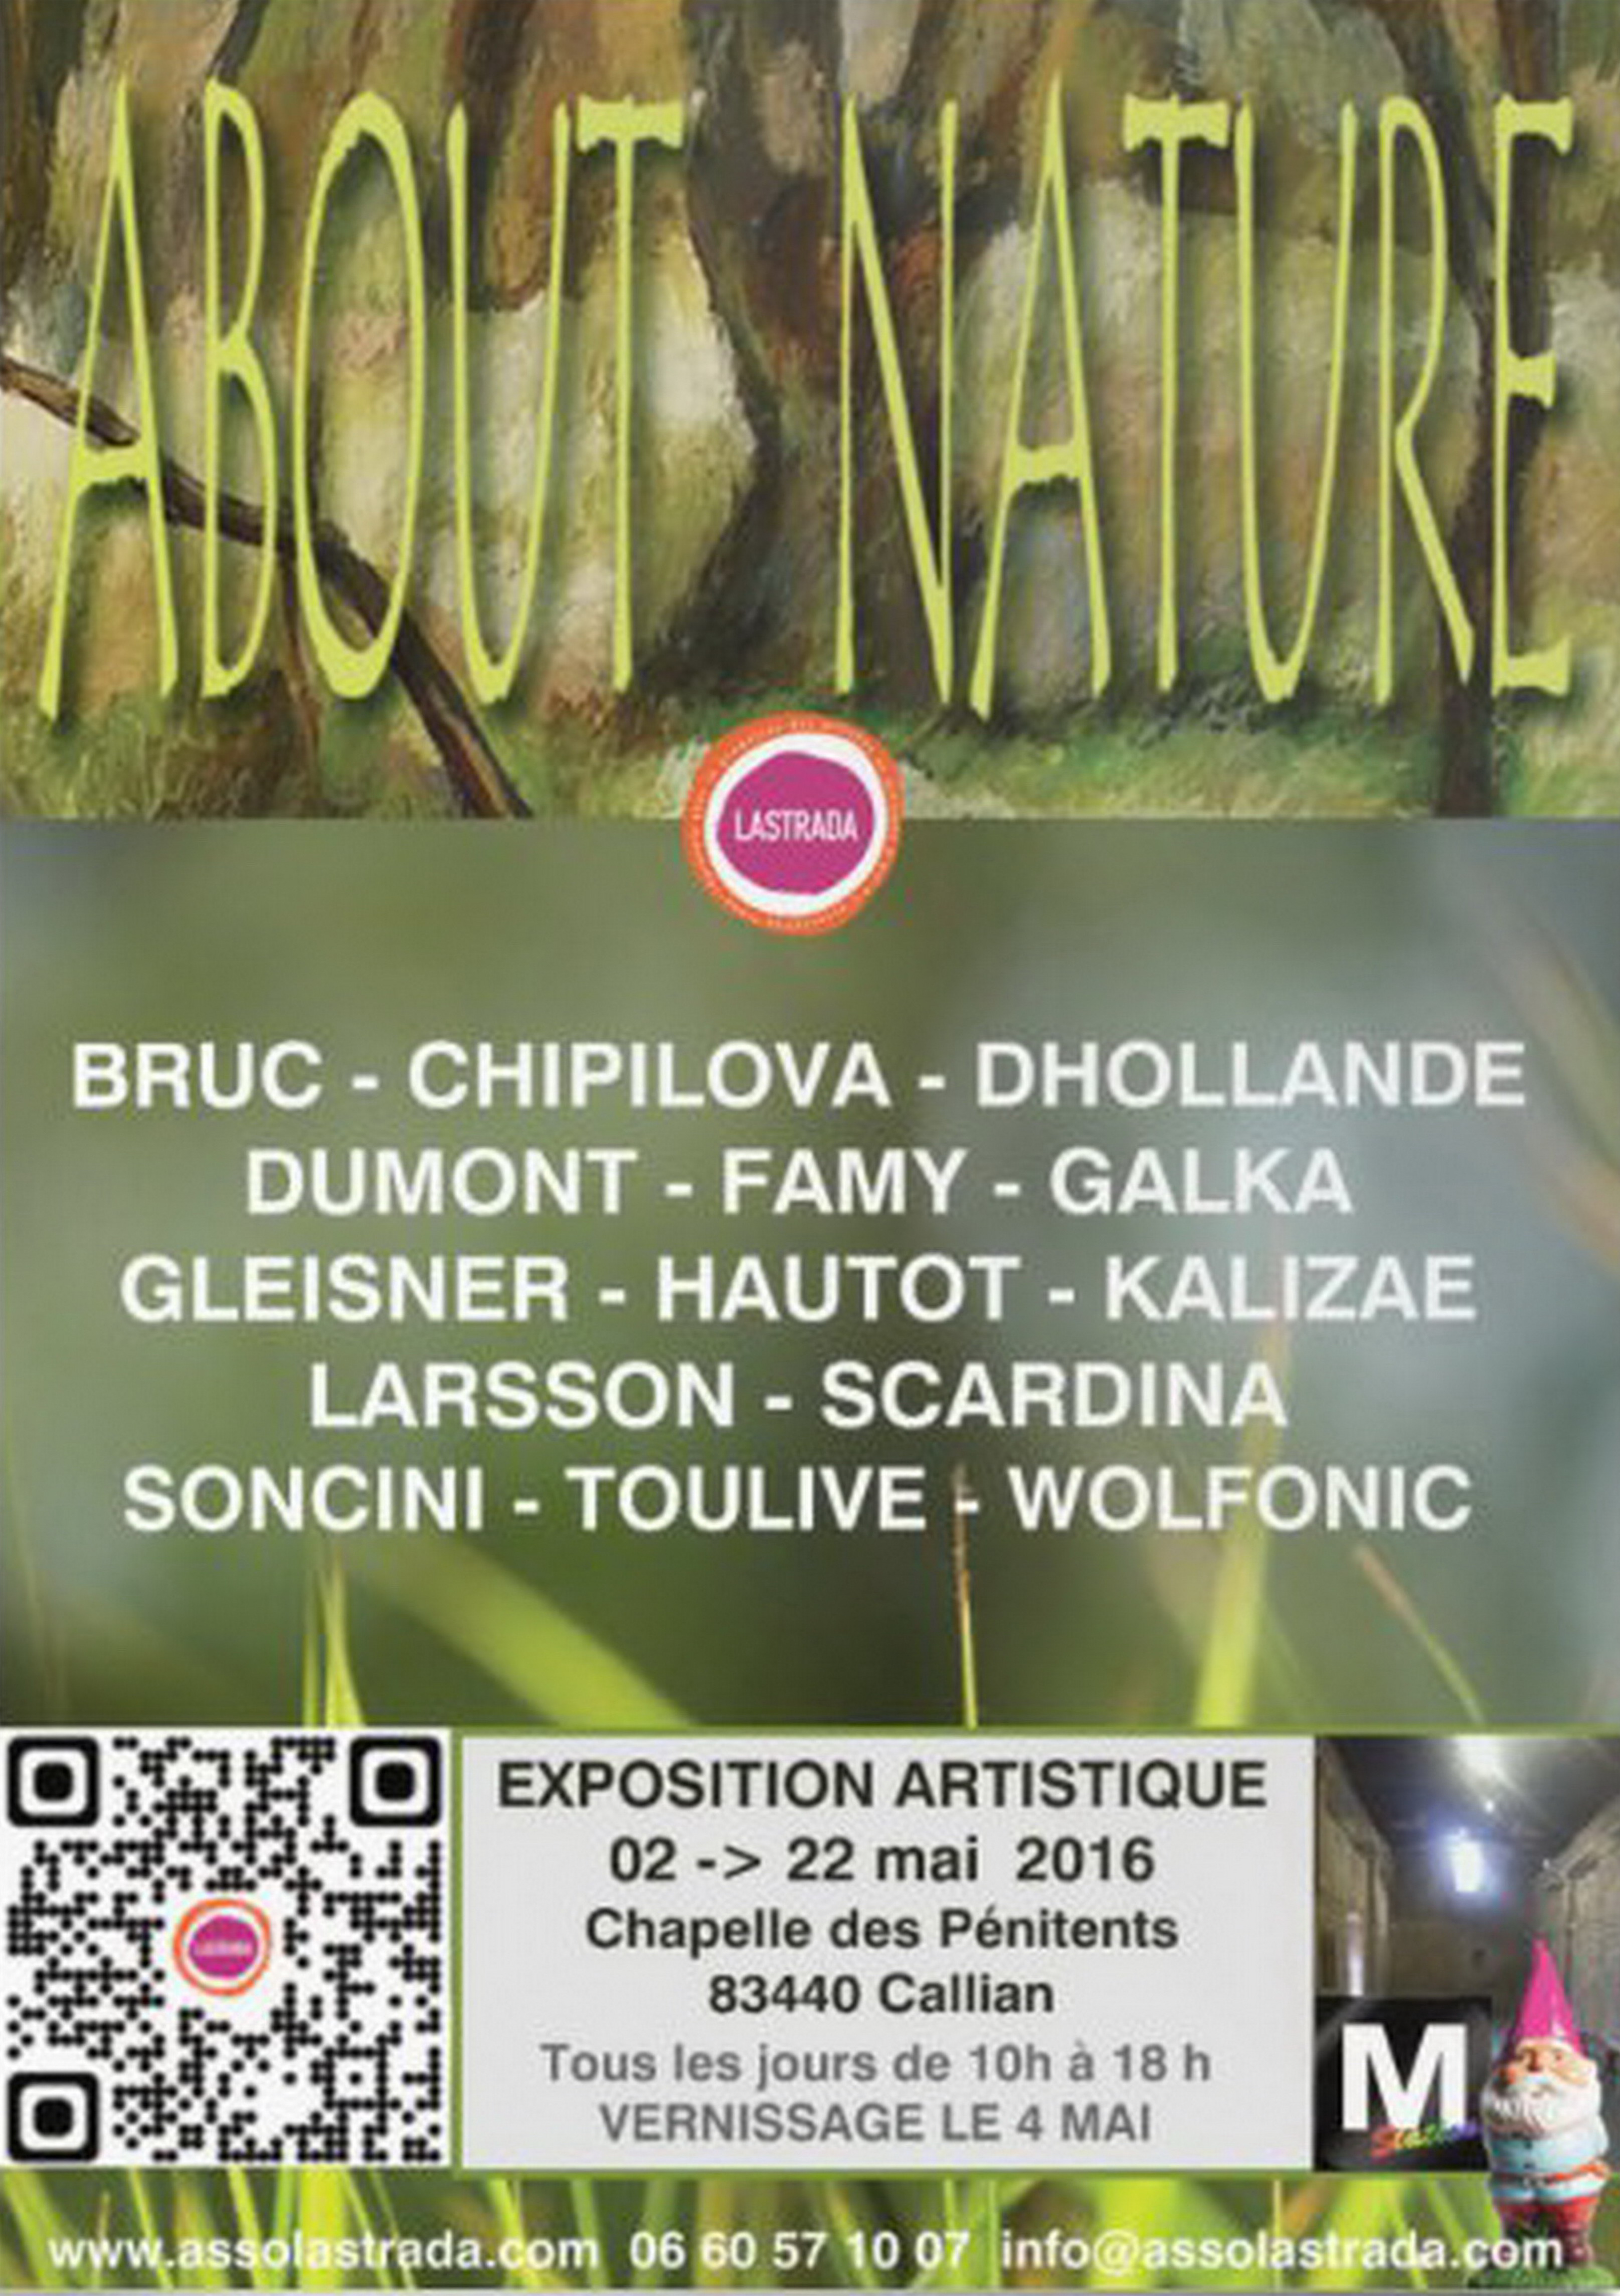 Exposition collective « About Nature » 2-22 mai 2016